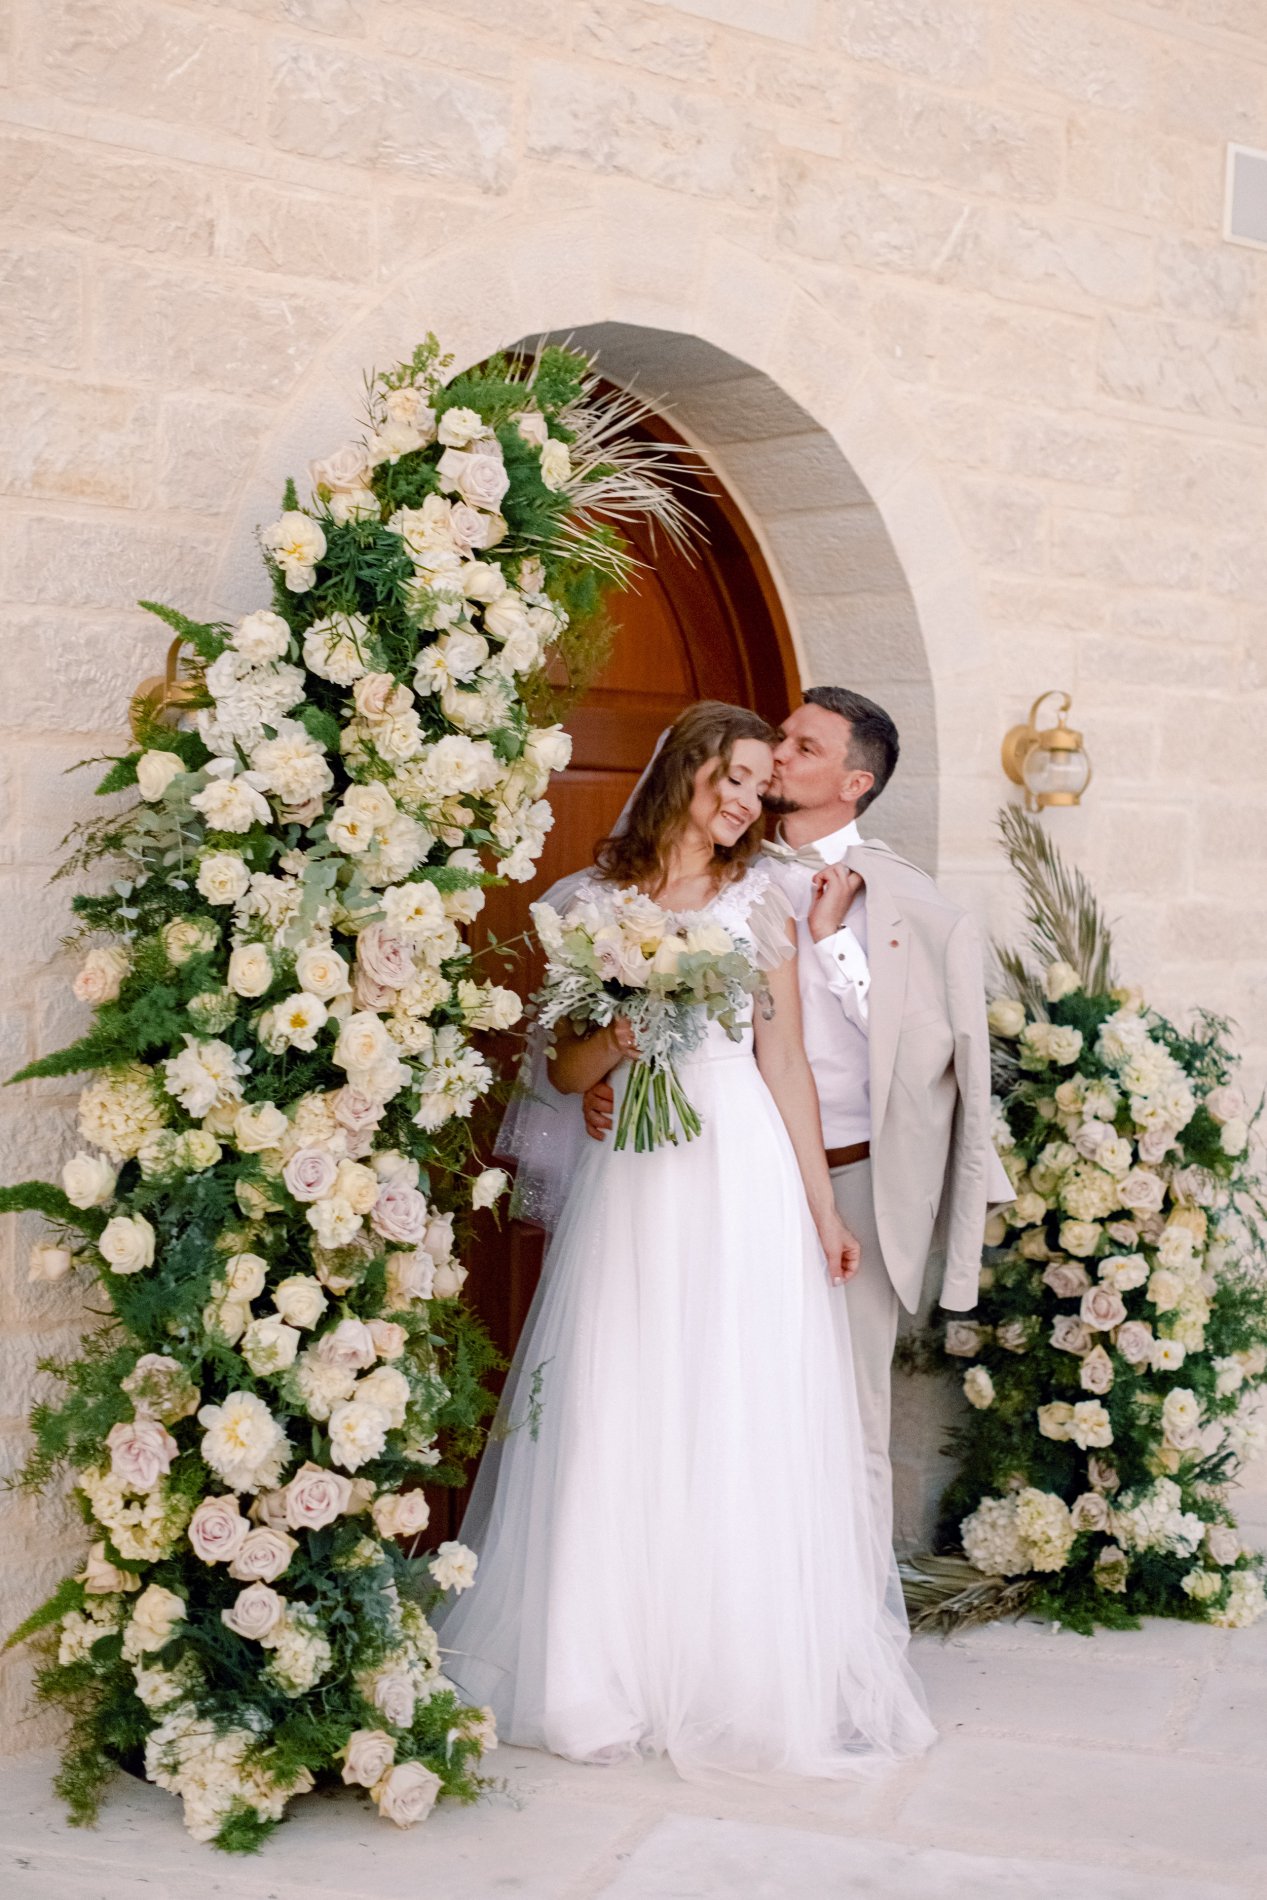 Tiny Orthodox Wedding in Crete With Lavish Private Villa Party Bride and Groom by the Church